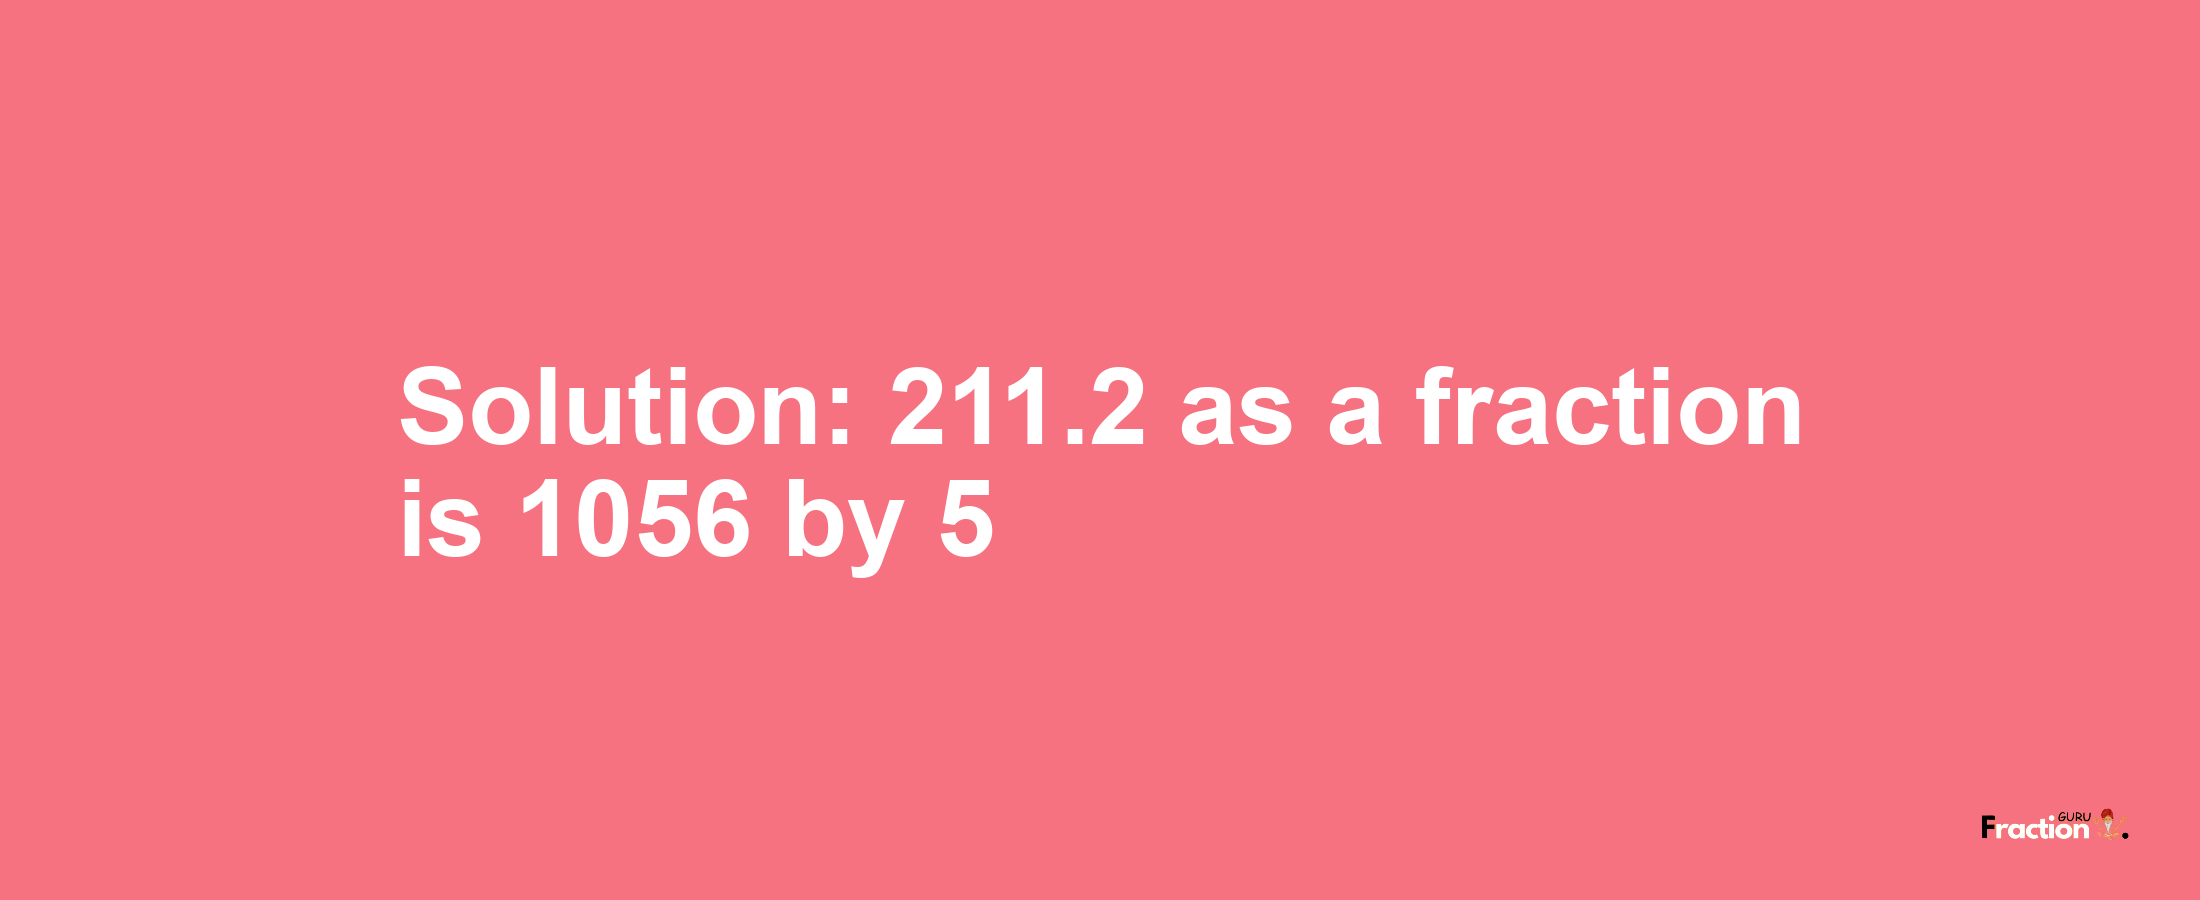 Solution:211.2 as a fraction is 1056/5